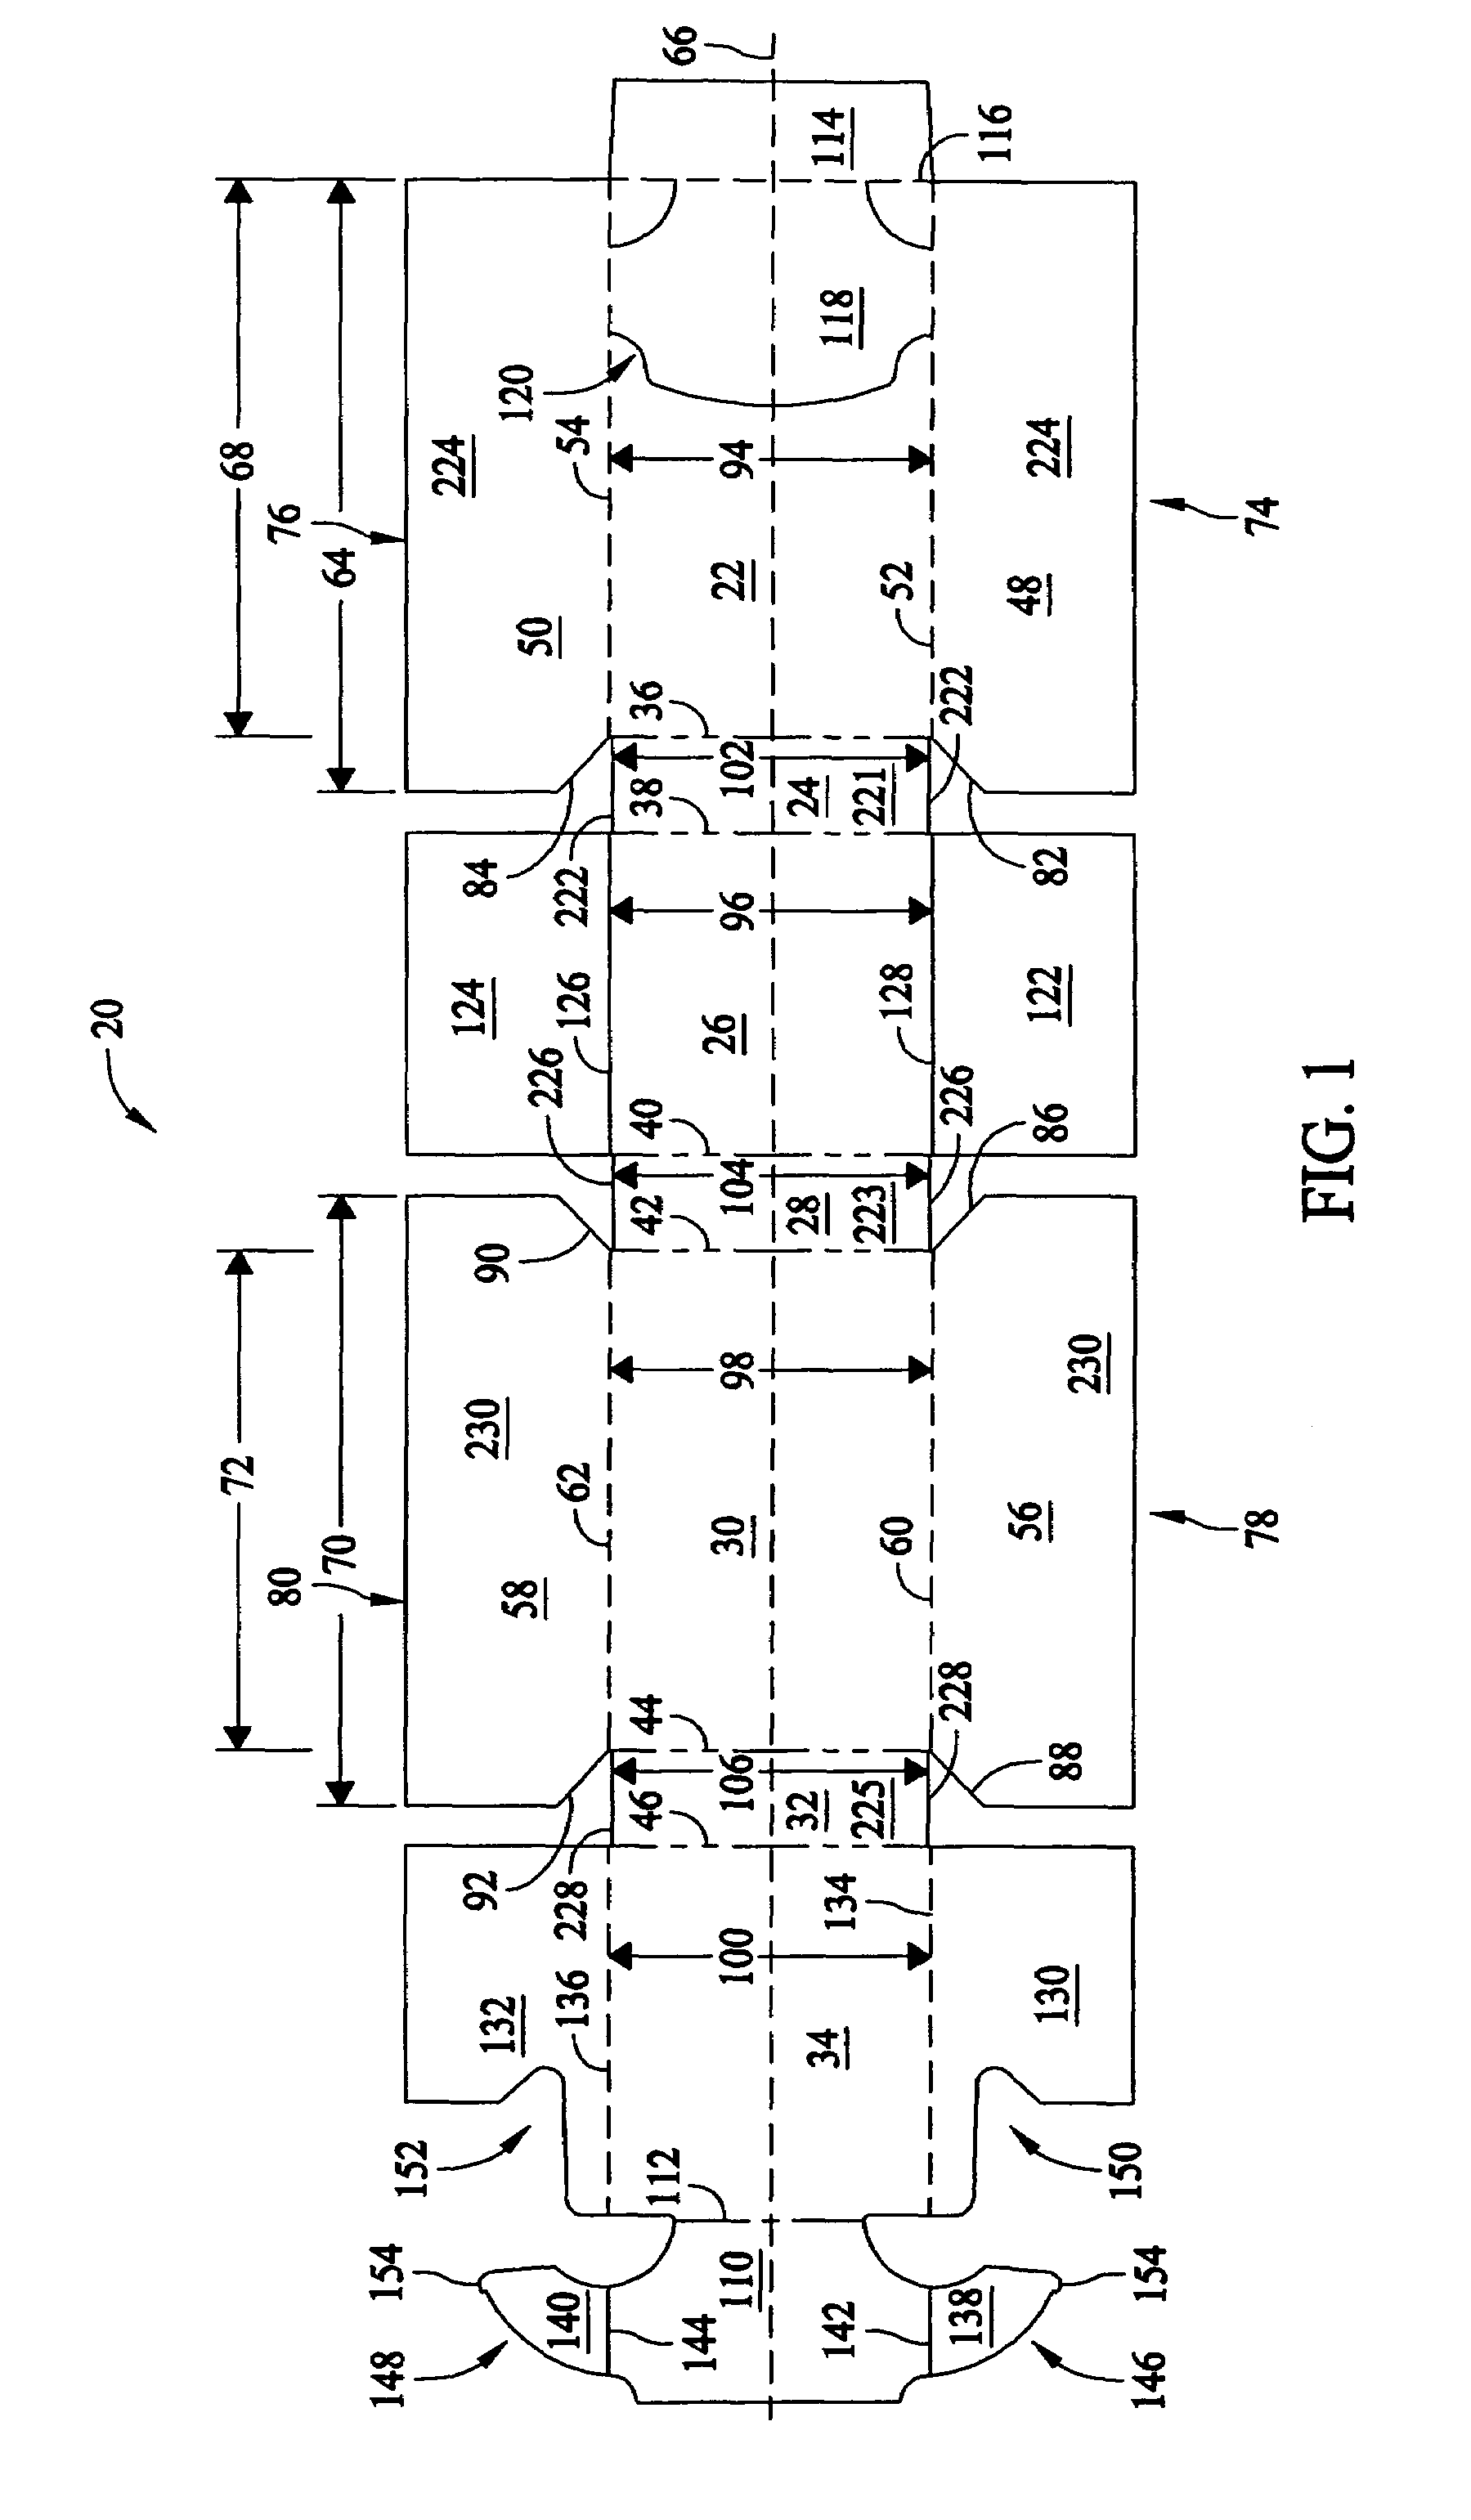 Blank and methods and apparatus for forming a dispenser case from the blank